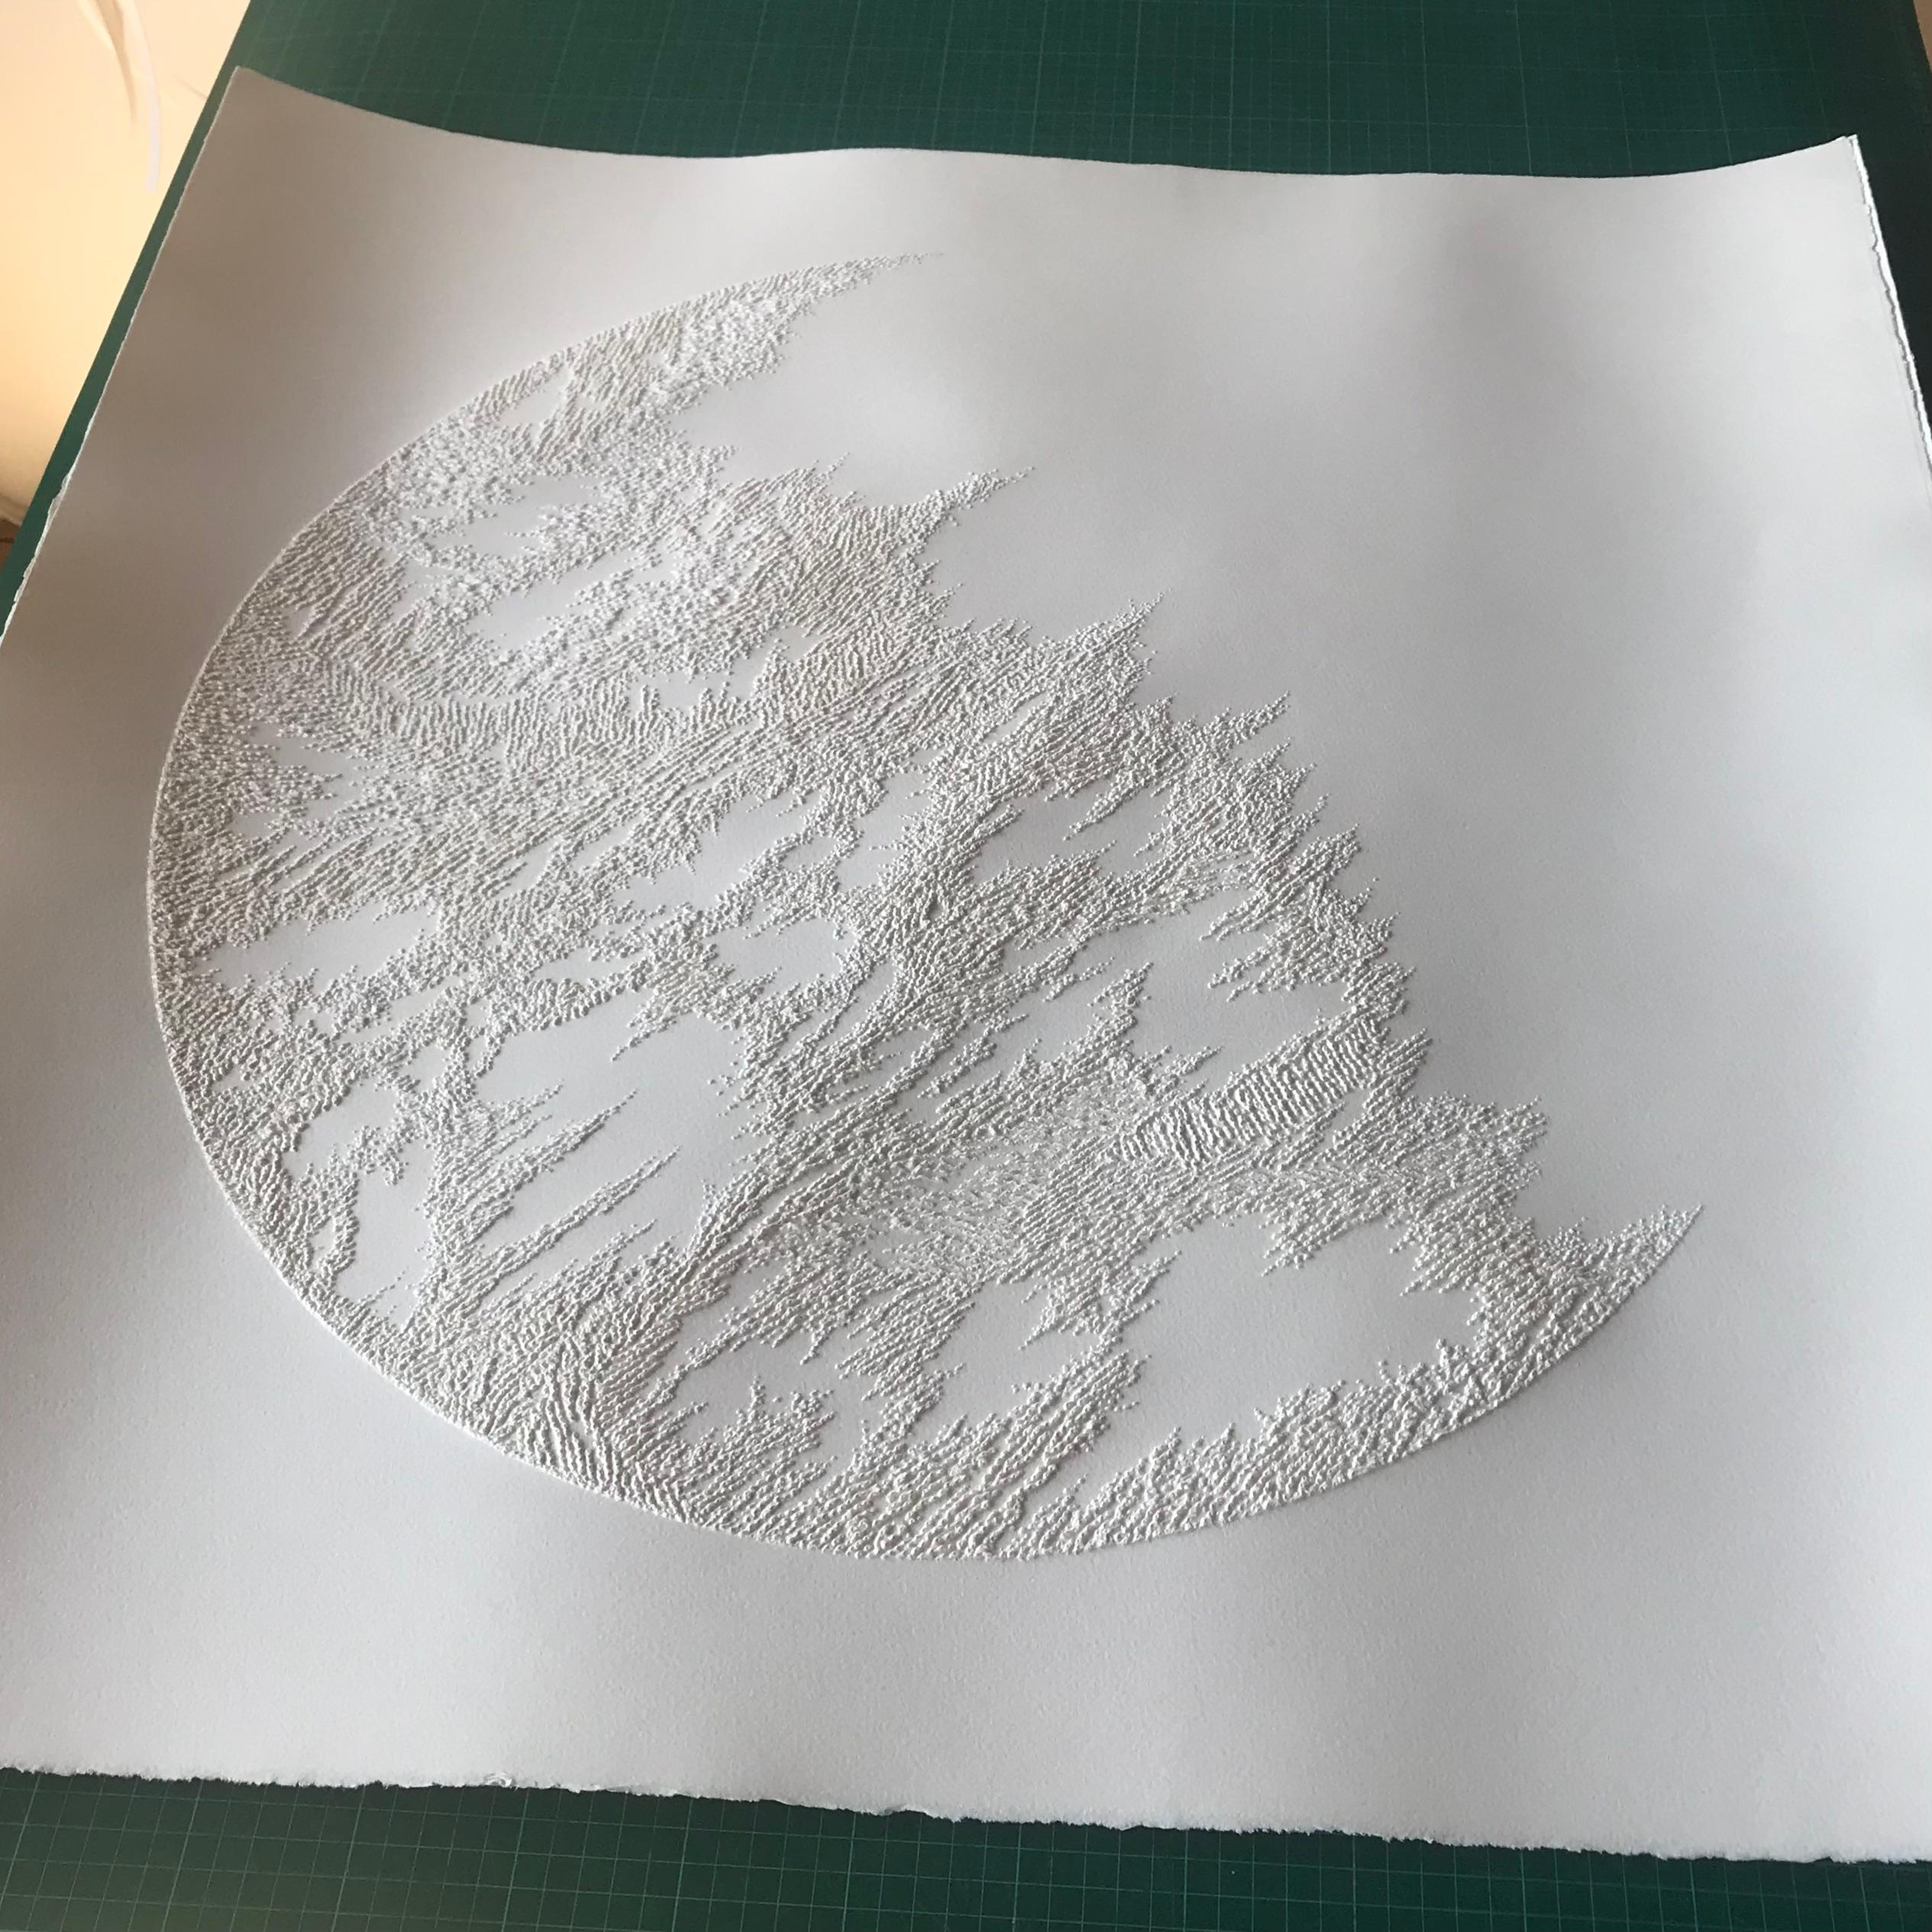 Moon Circle 1 - intricate white 3D abstract geometric pulled paper drawing  - Art by Antonin Anzil